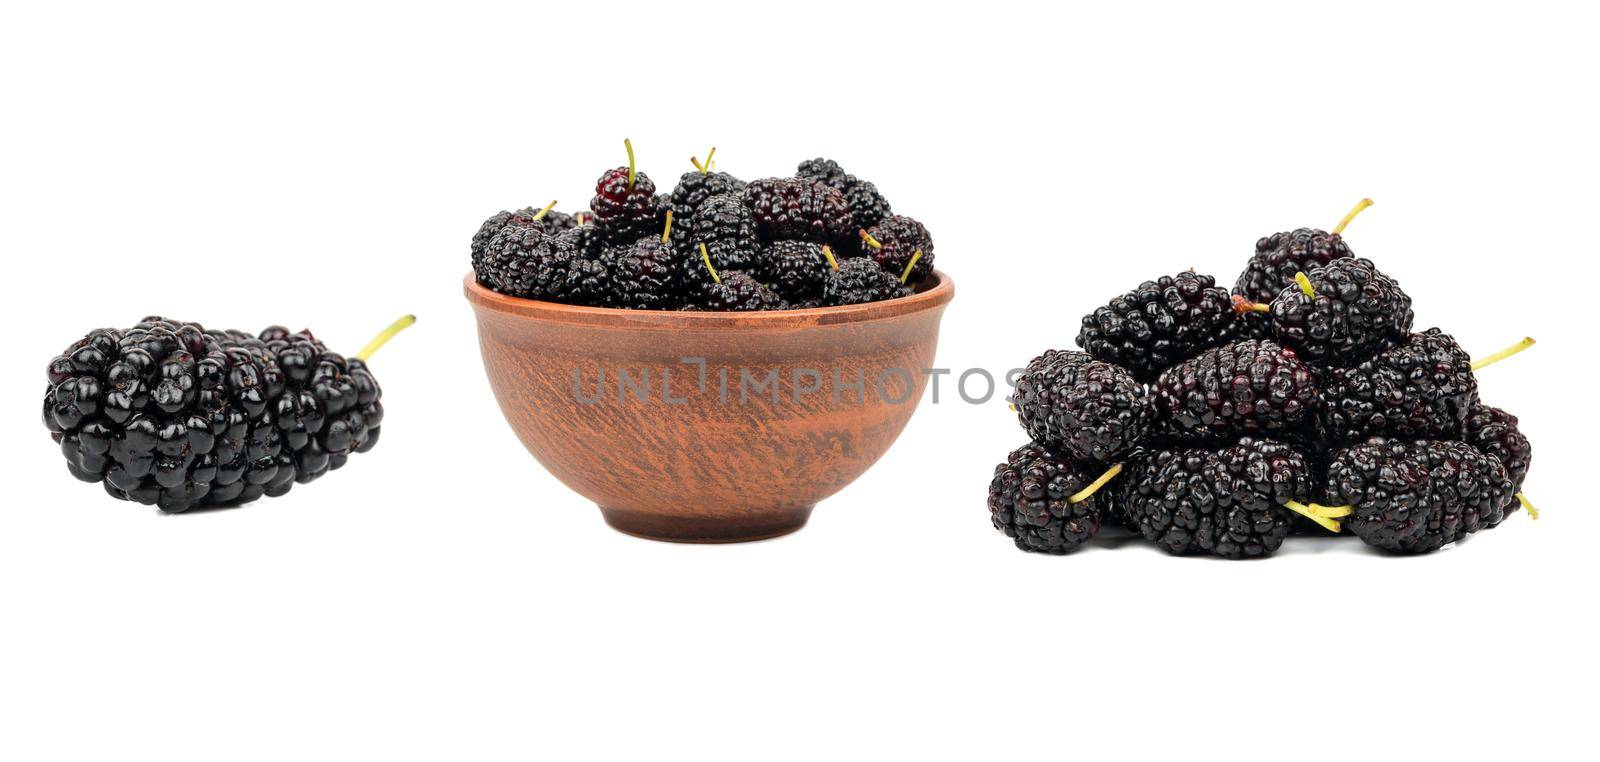 Ripe blackberry isolated on white background with clipping path. Fresh summer wild berries closeup. Detailed Blackberry collection with leaves.